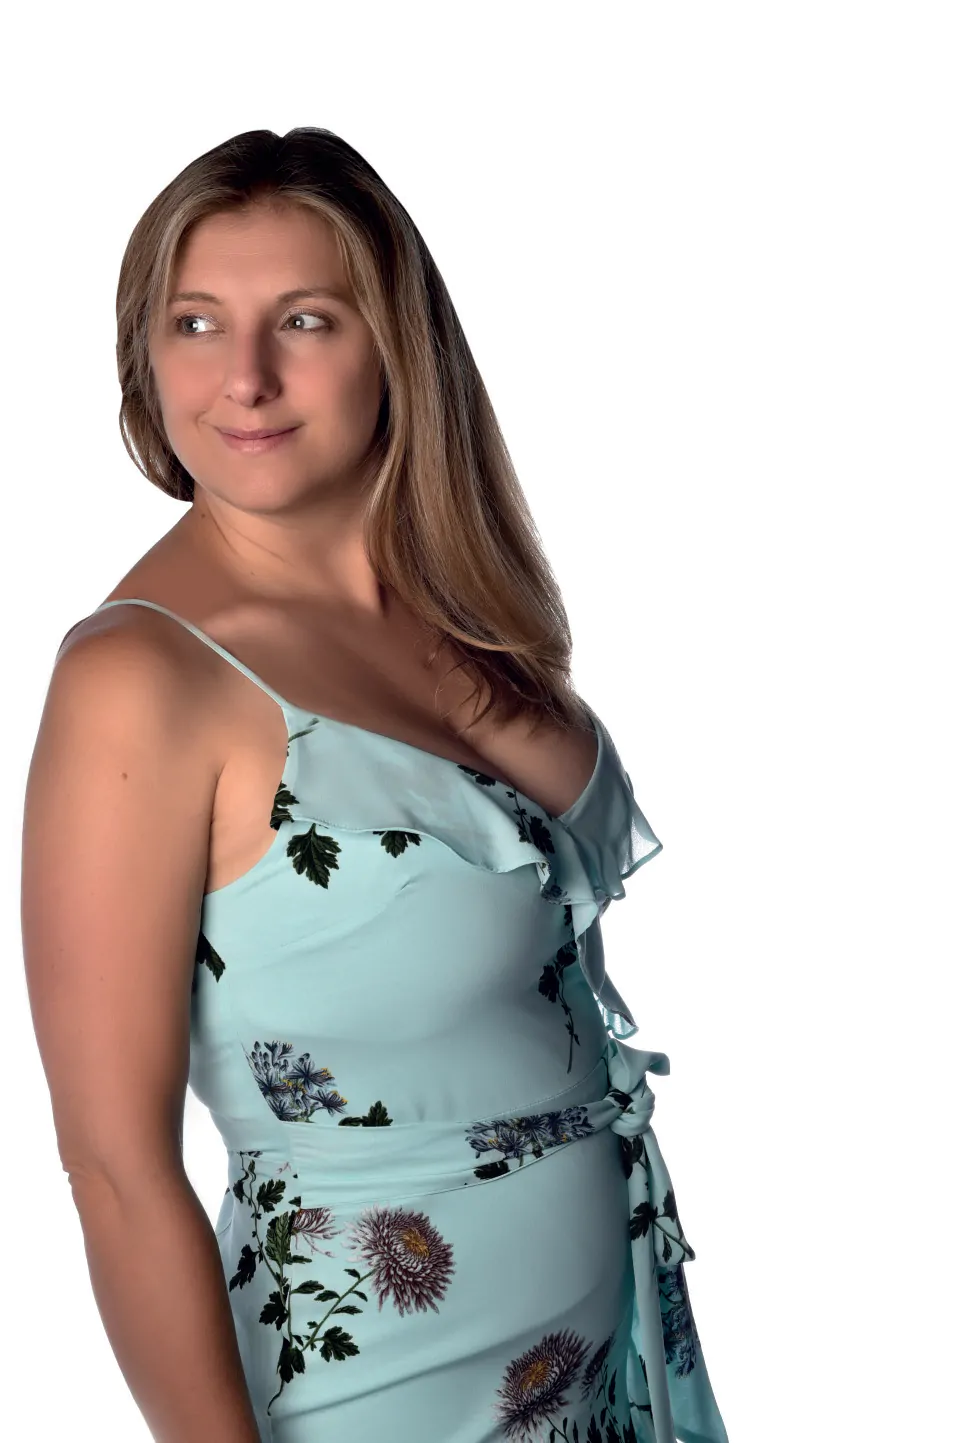 A woman in a blue dress posing for a marketing agency photo.